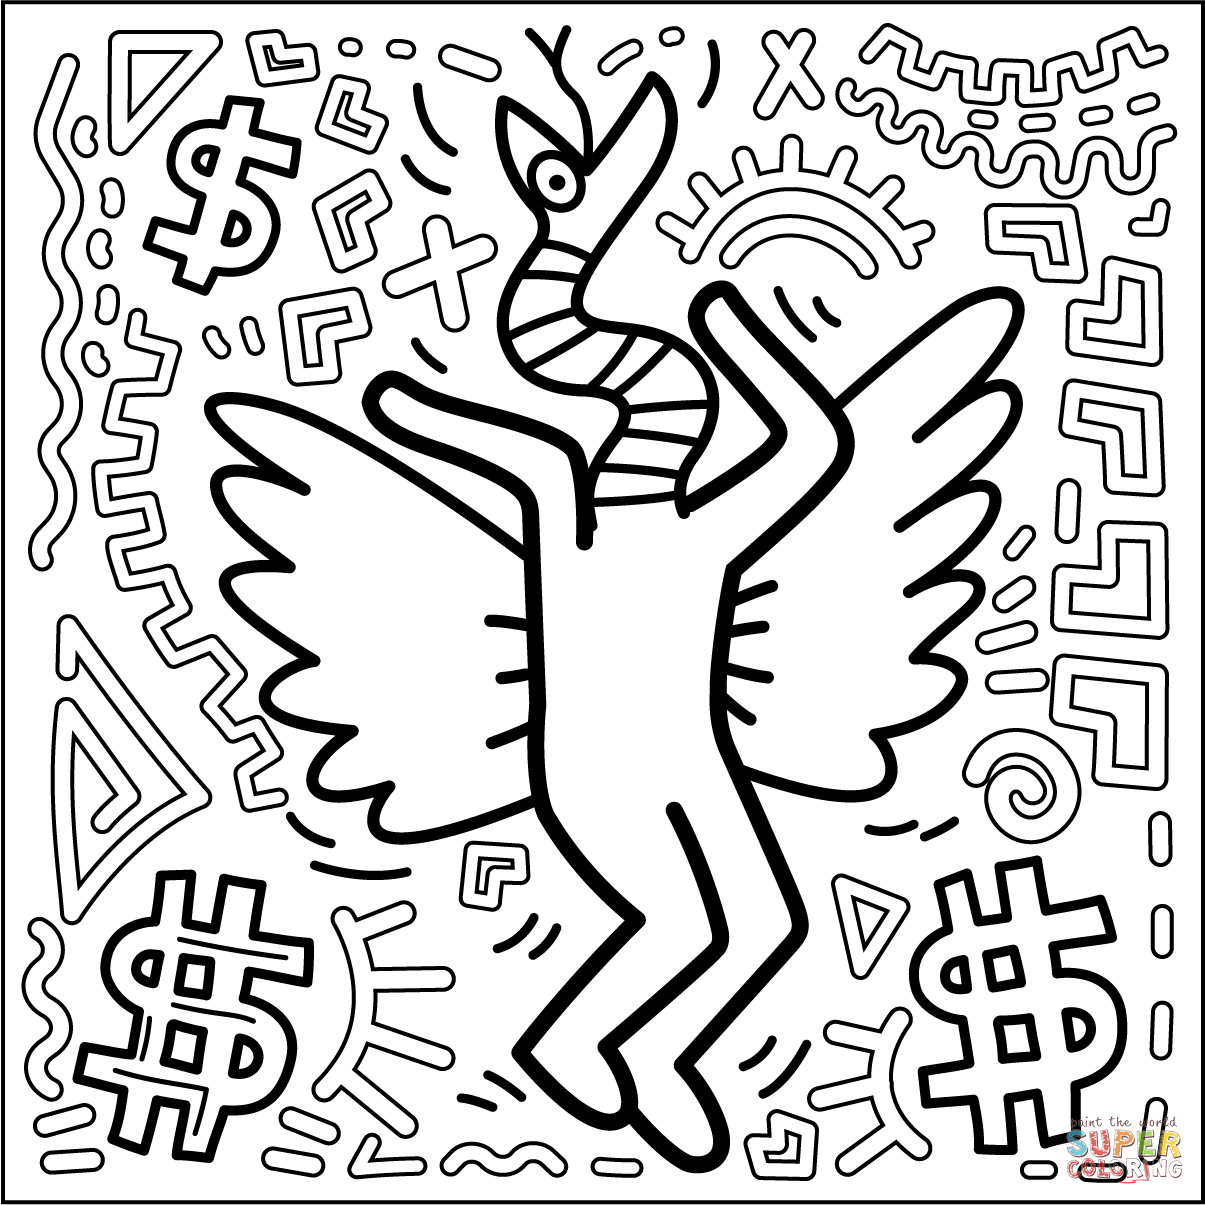 Keith haring style coloring page free printable coloring pages